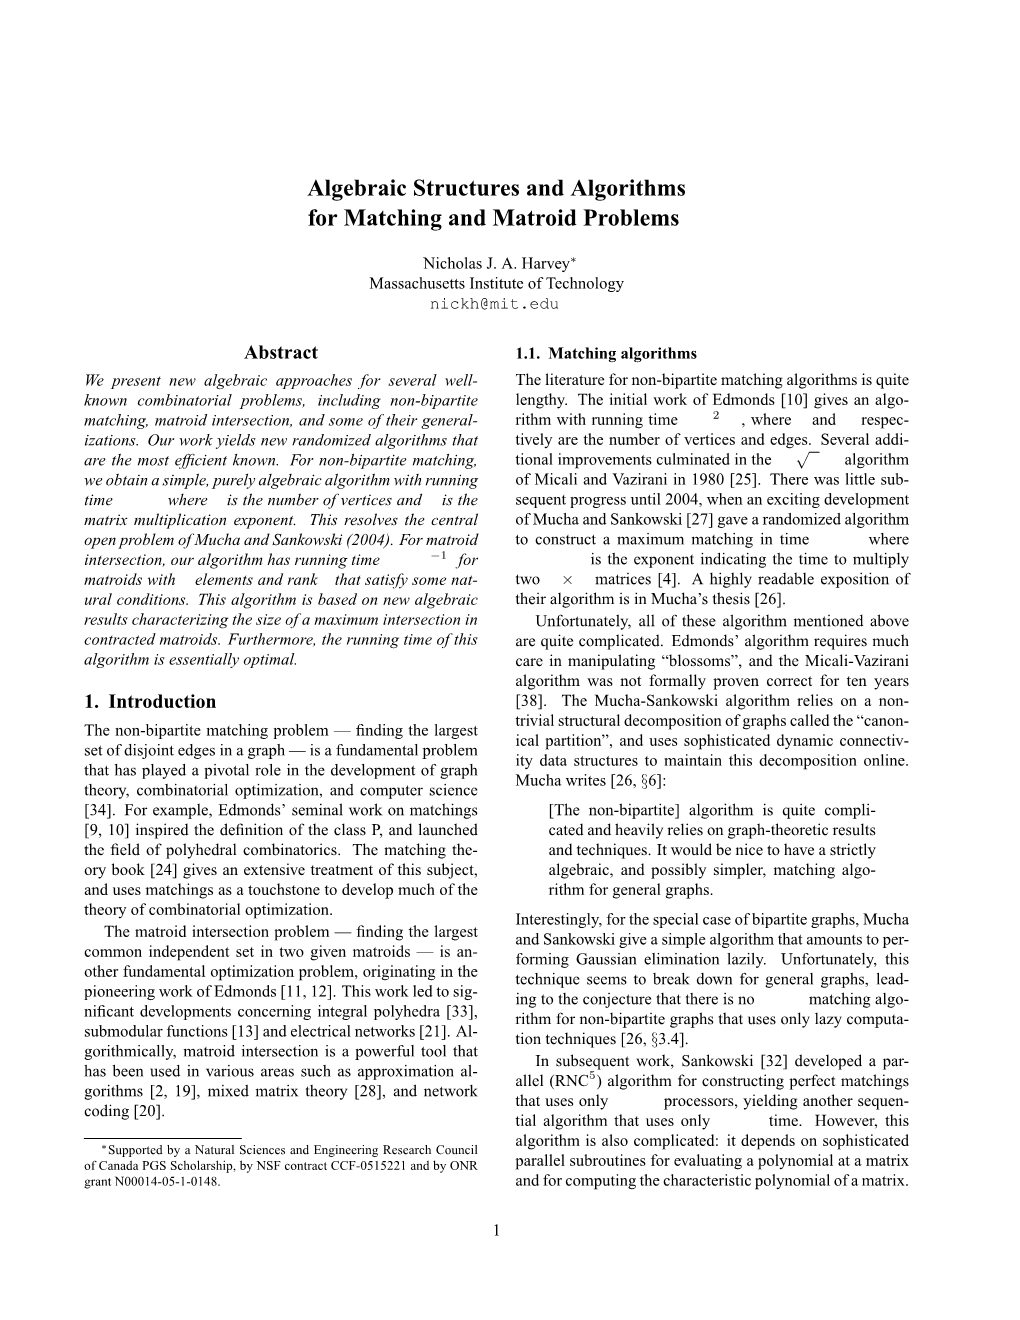 Algebraic Structures and Algorithms for Matching and Matroid Problems